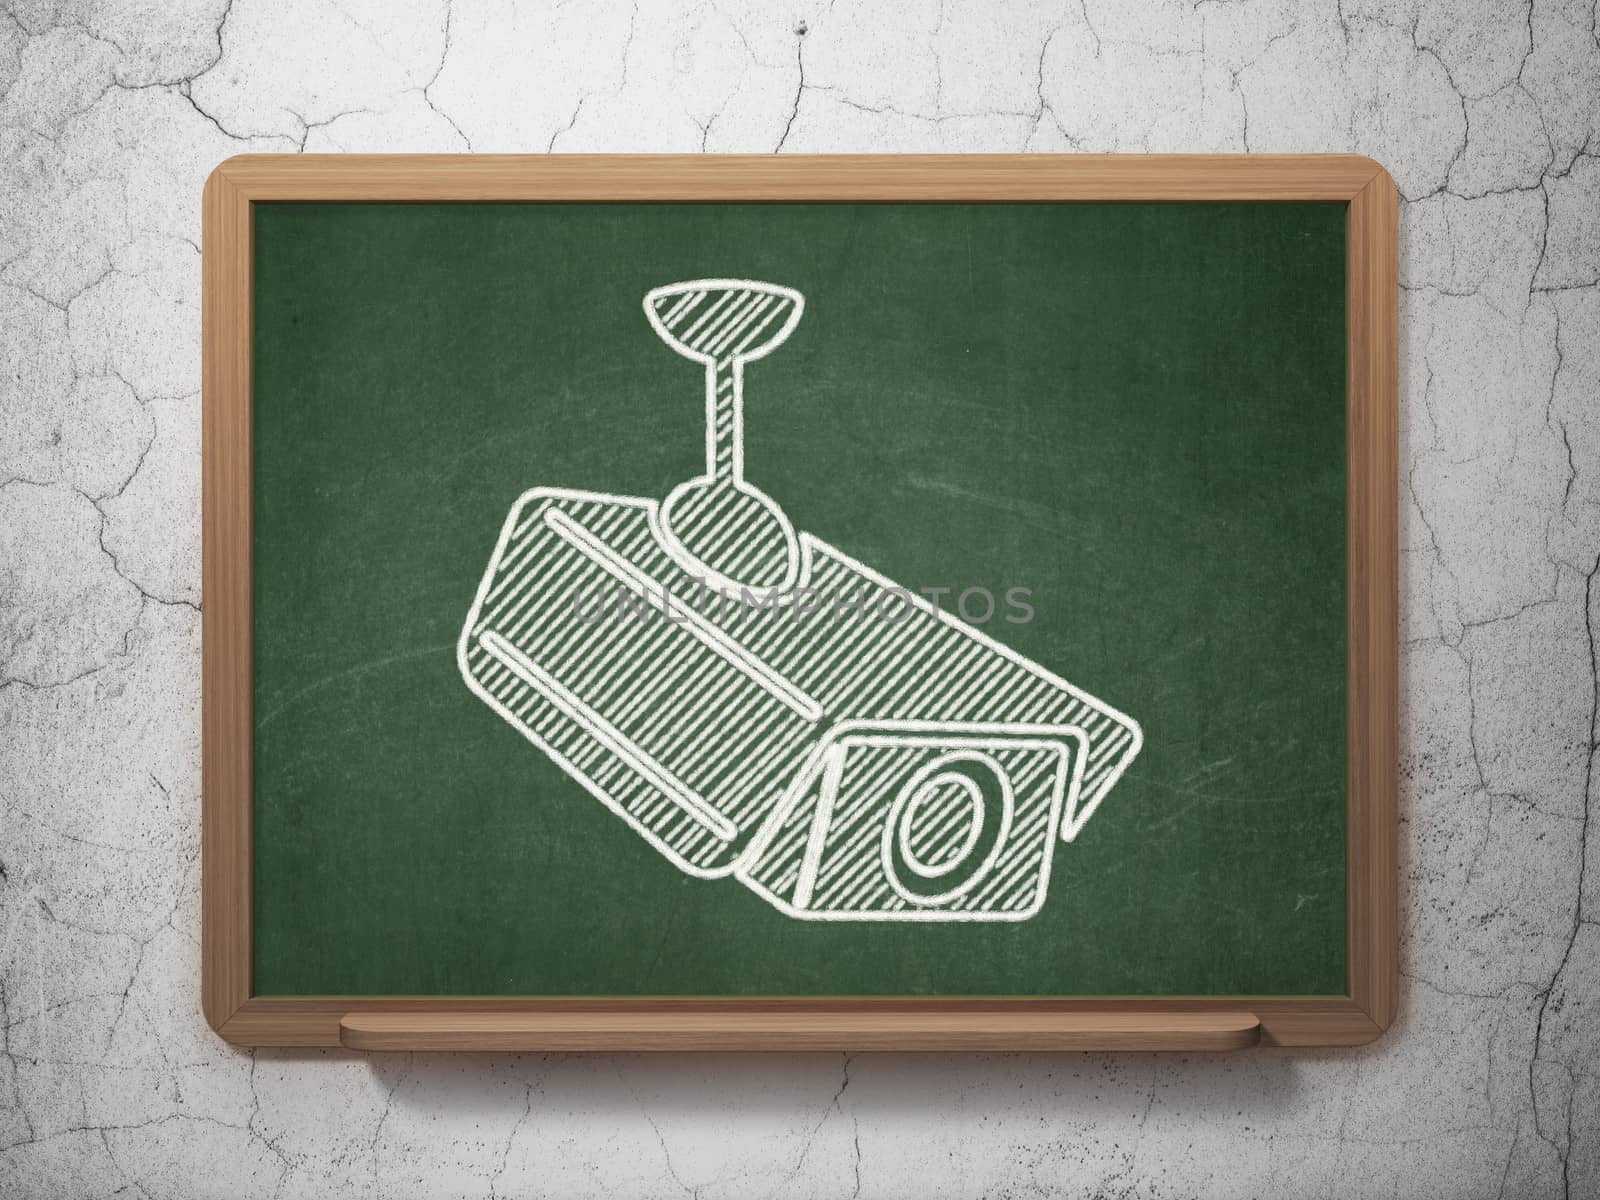 Privacy concept: Cctv Camera icon on Green chalkboard on grunge wall background, 3d render